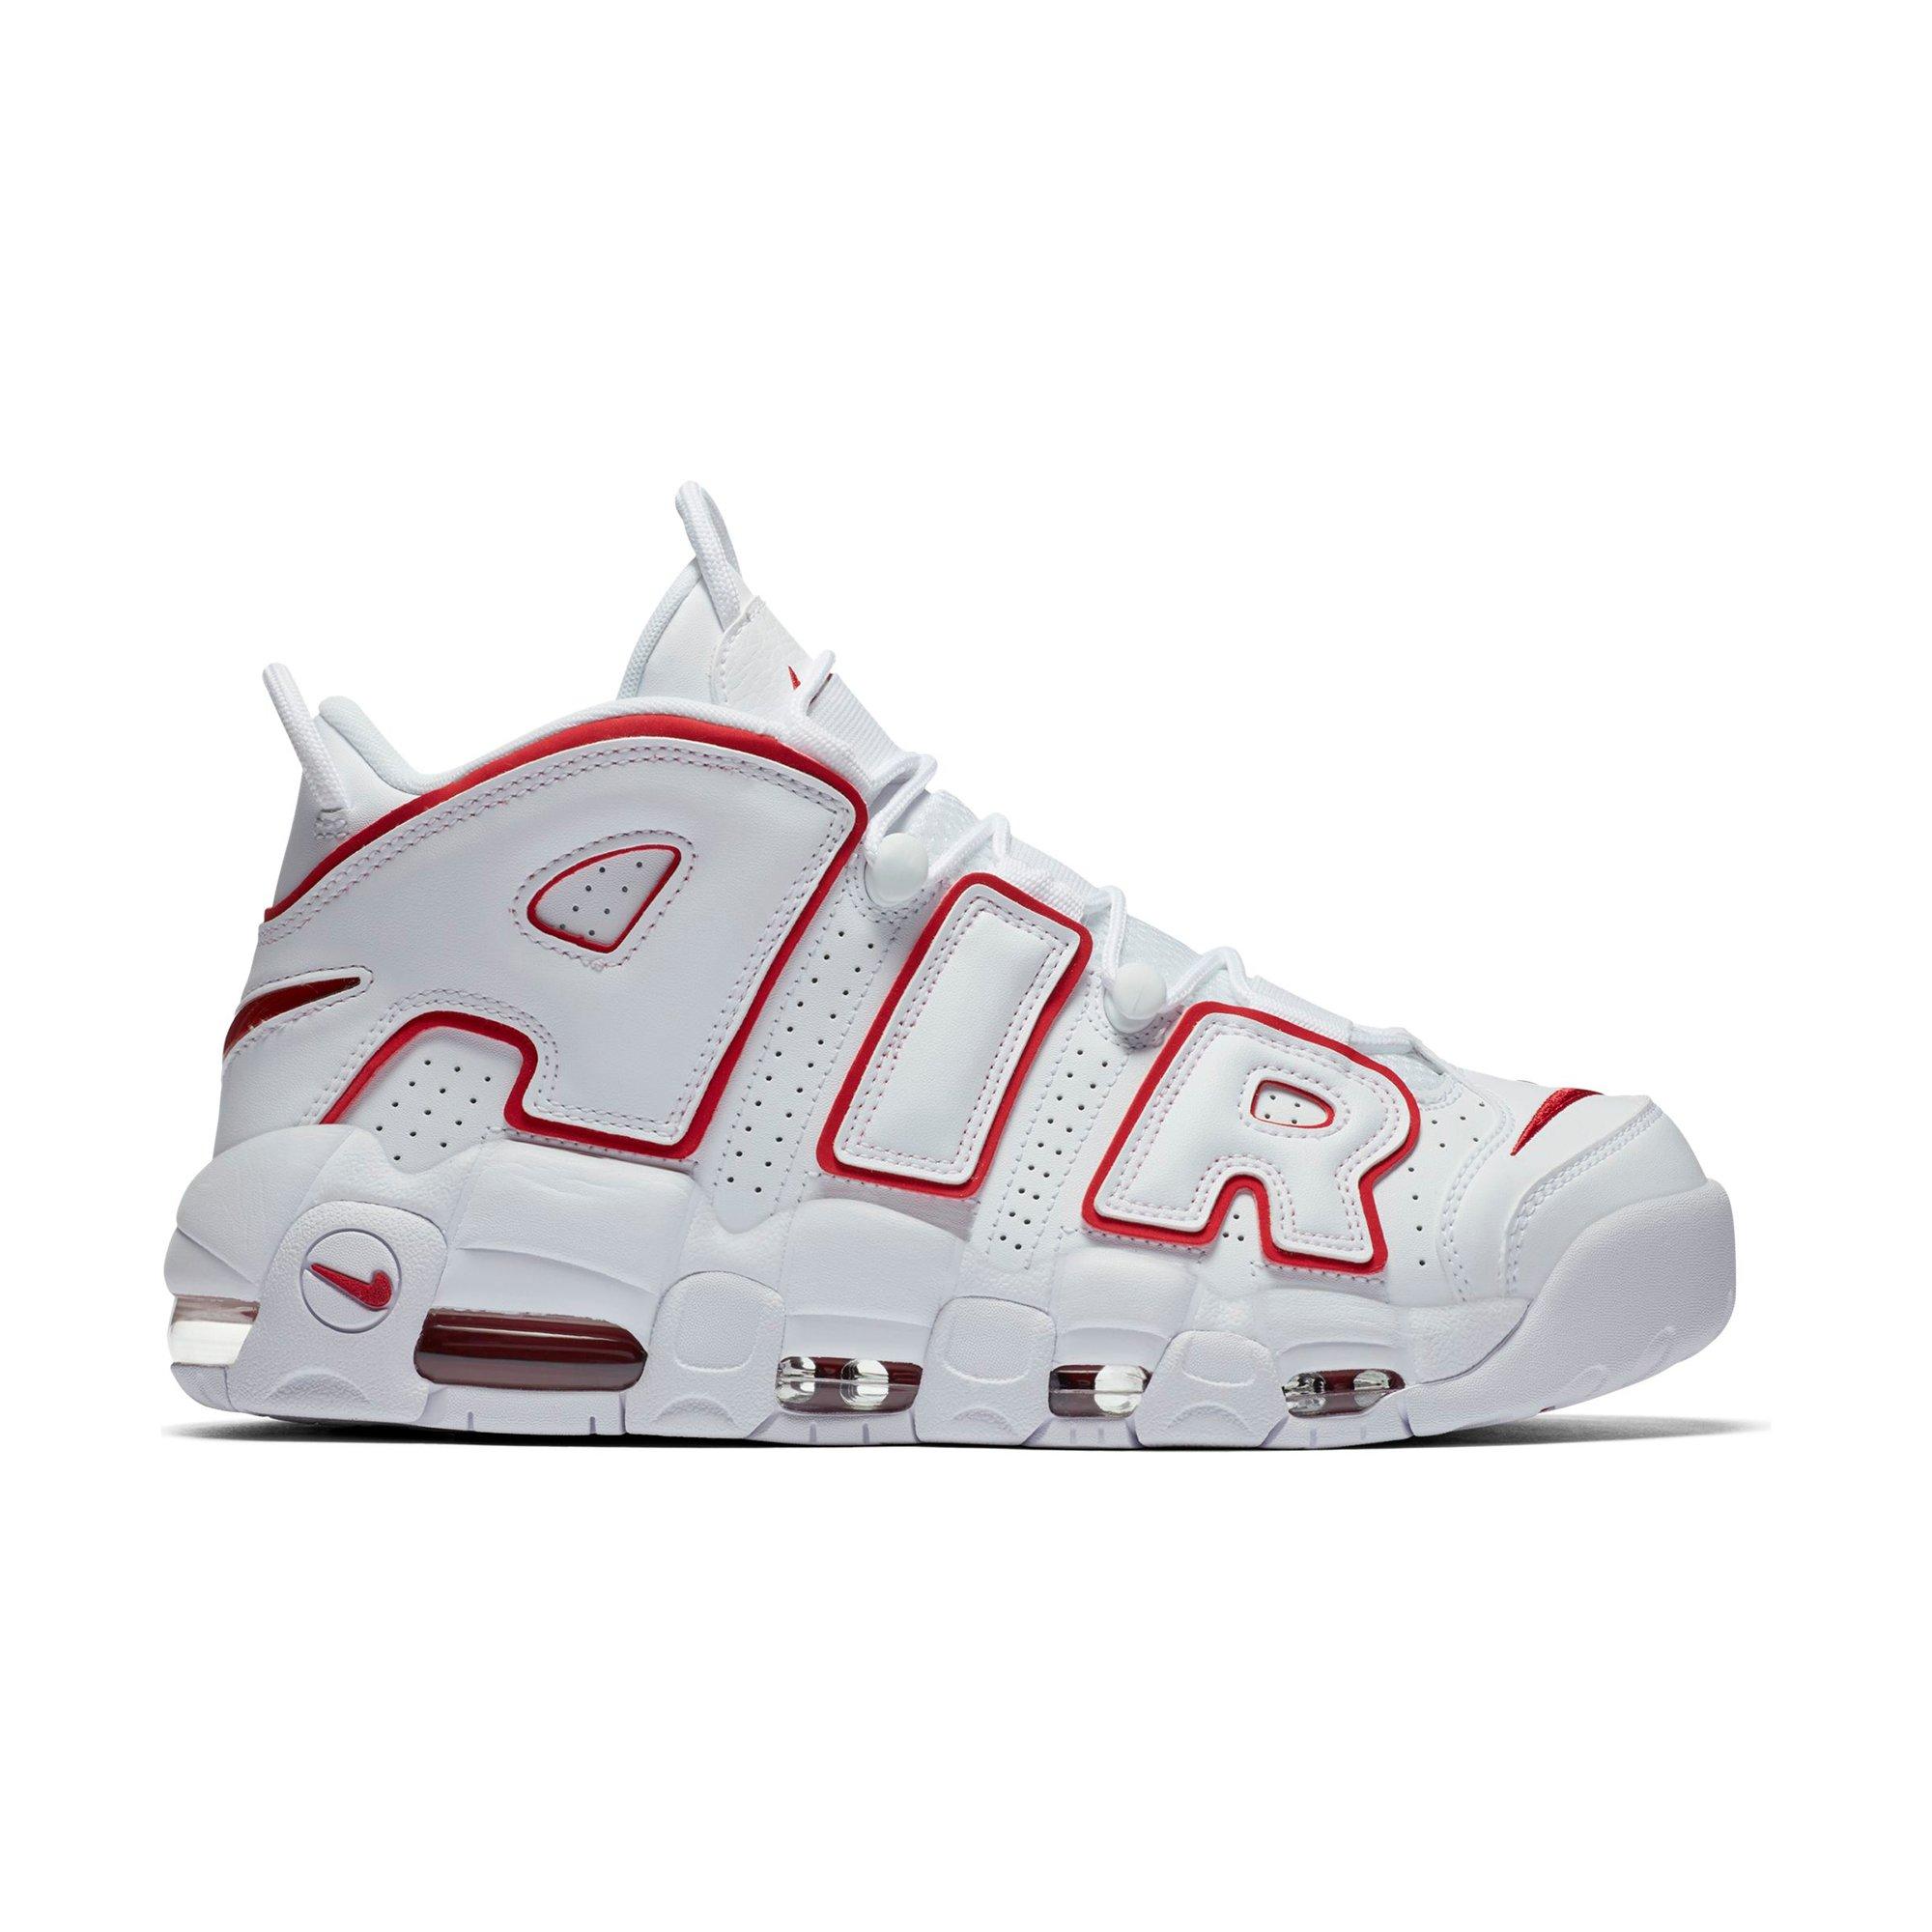 uptempo 96 red and white